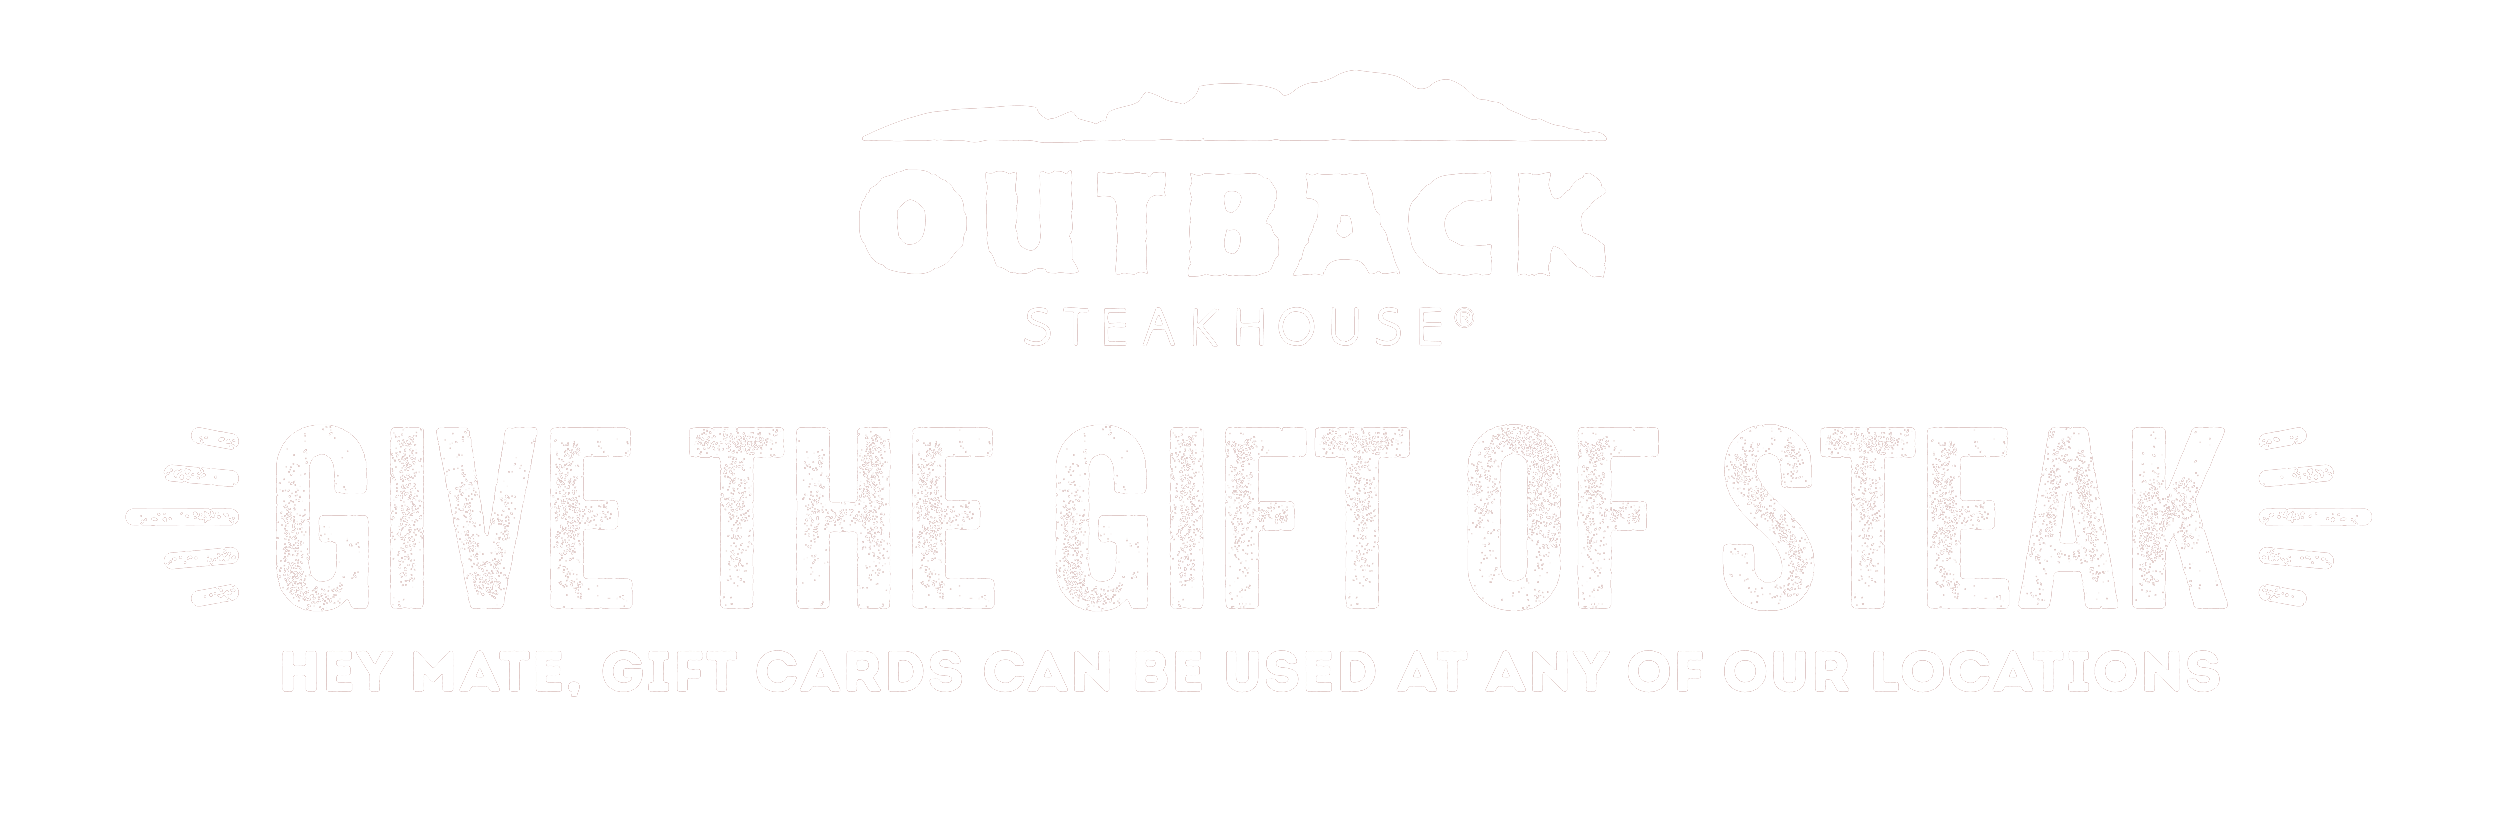 give the gift of steak